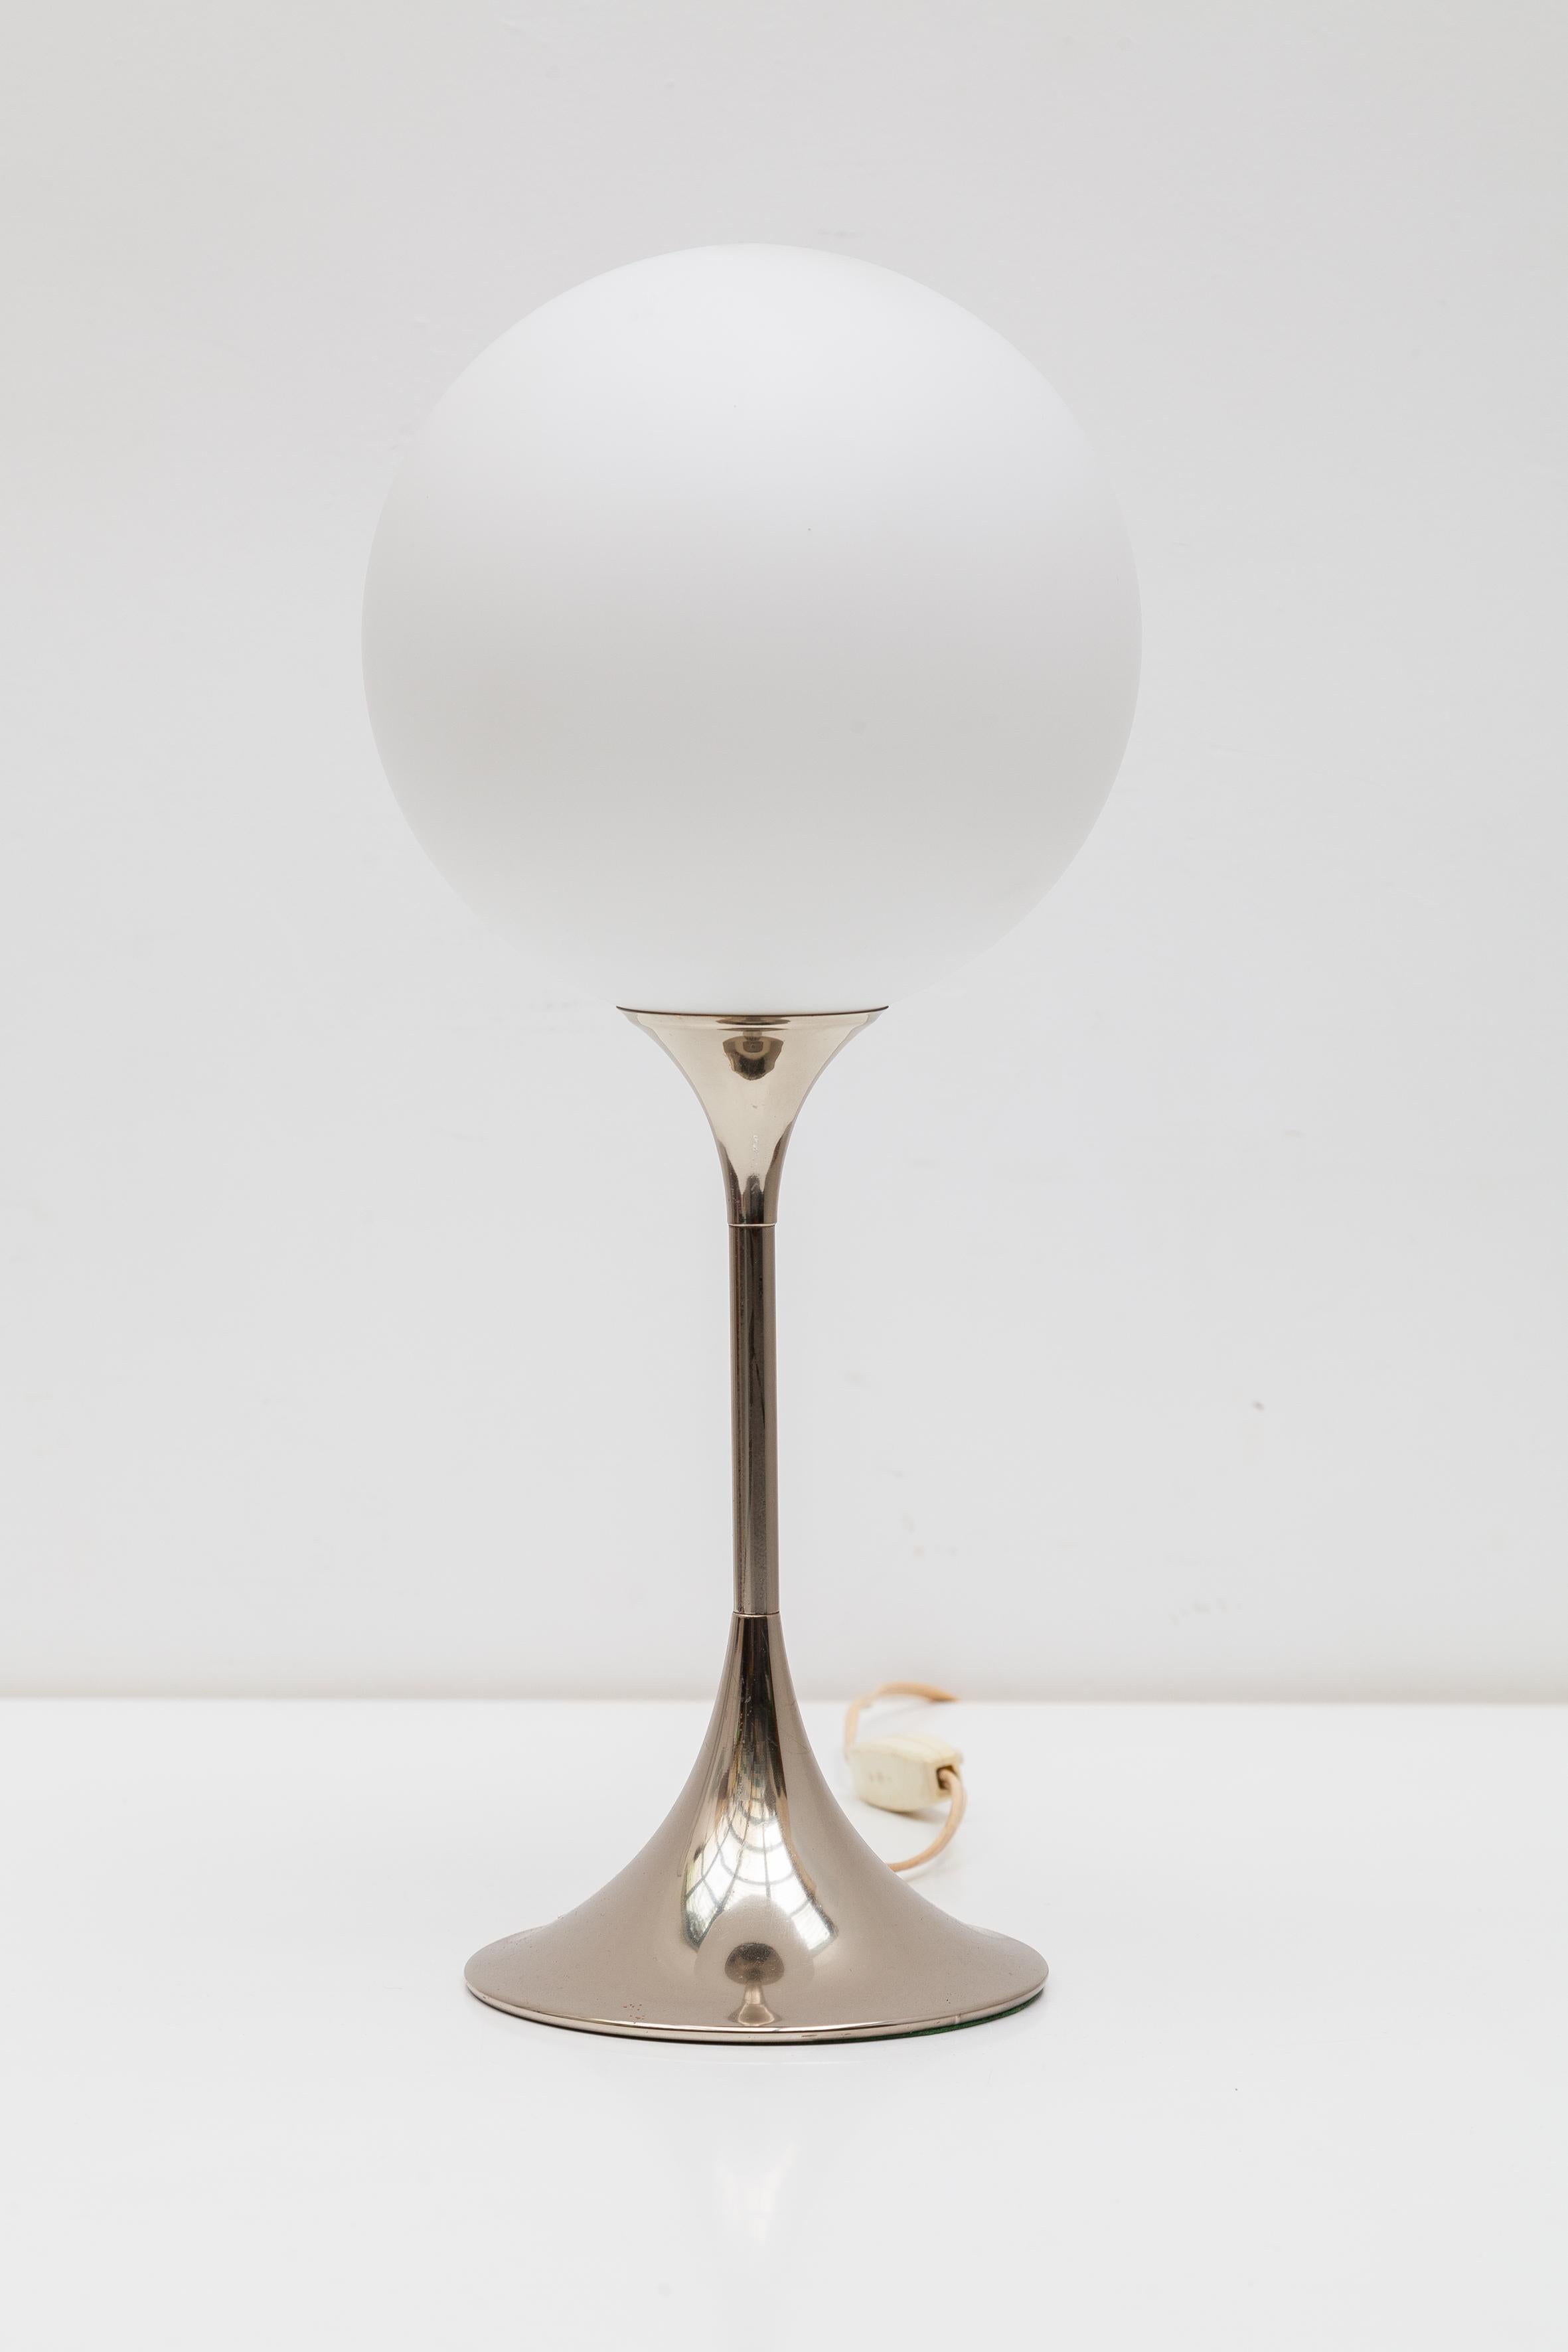 Mid-Century Modern chrome 'trumpet' table lamp with opaline glass globe designed by Gaetano Sciolari.
Dimensions: Table lamp: 20 W x 50 H x 20 W cm.

Also available one floor-lamp and one Uplighter Chandelier.

